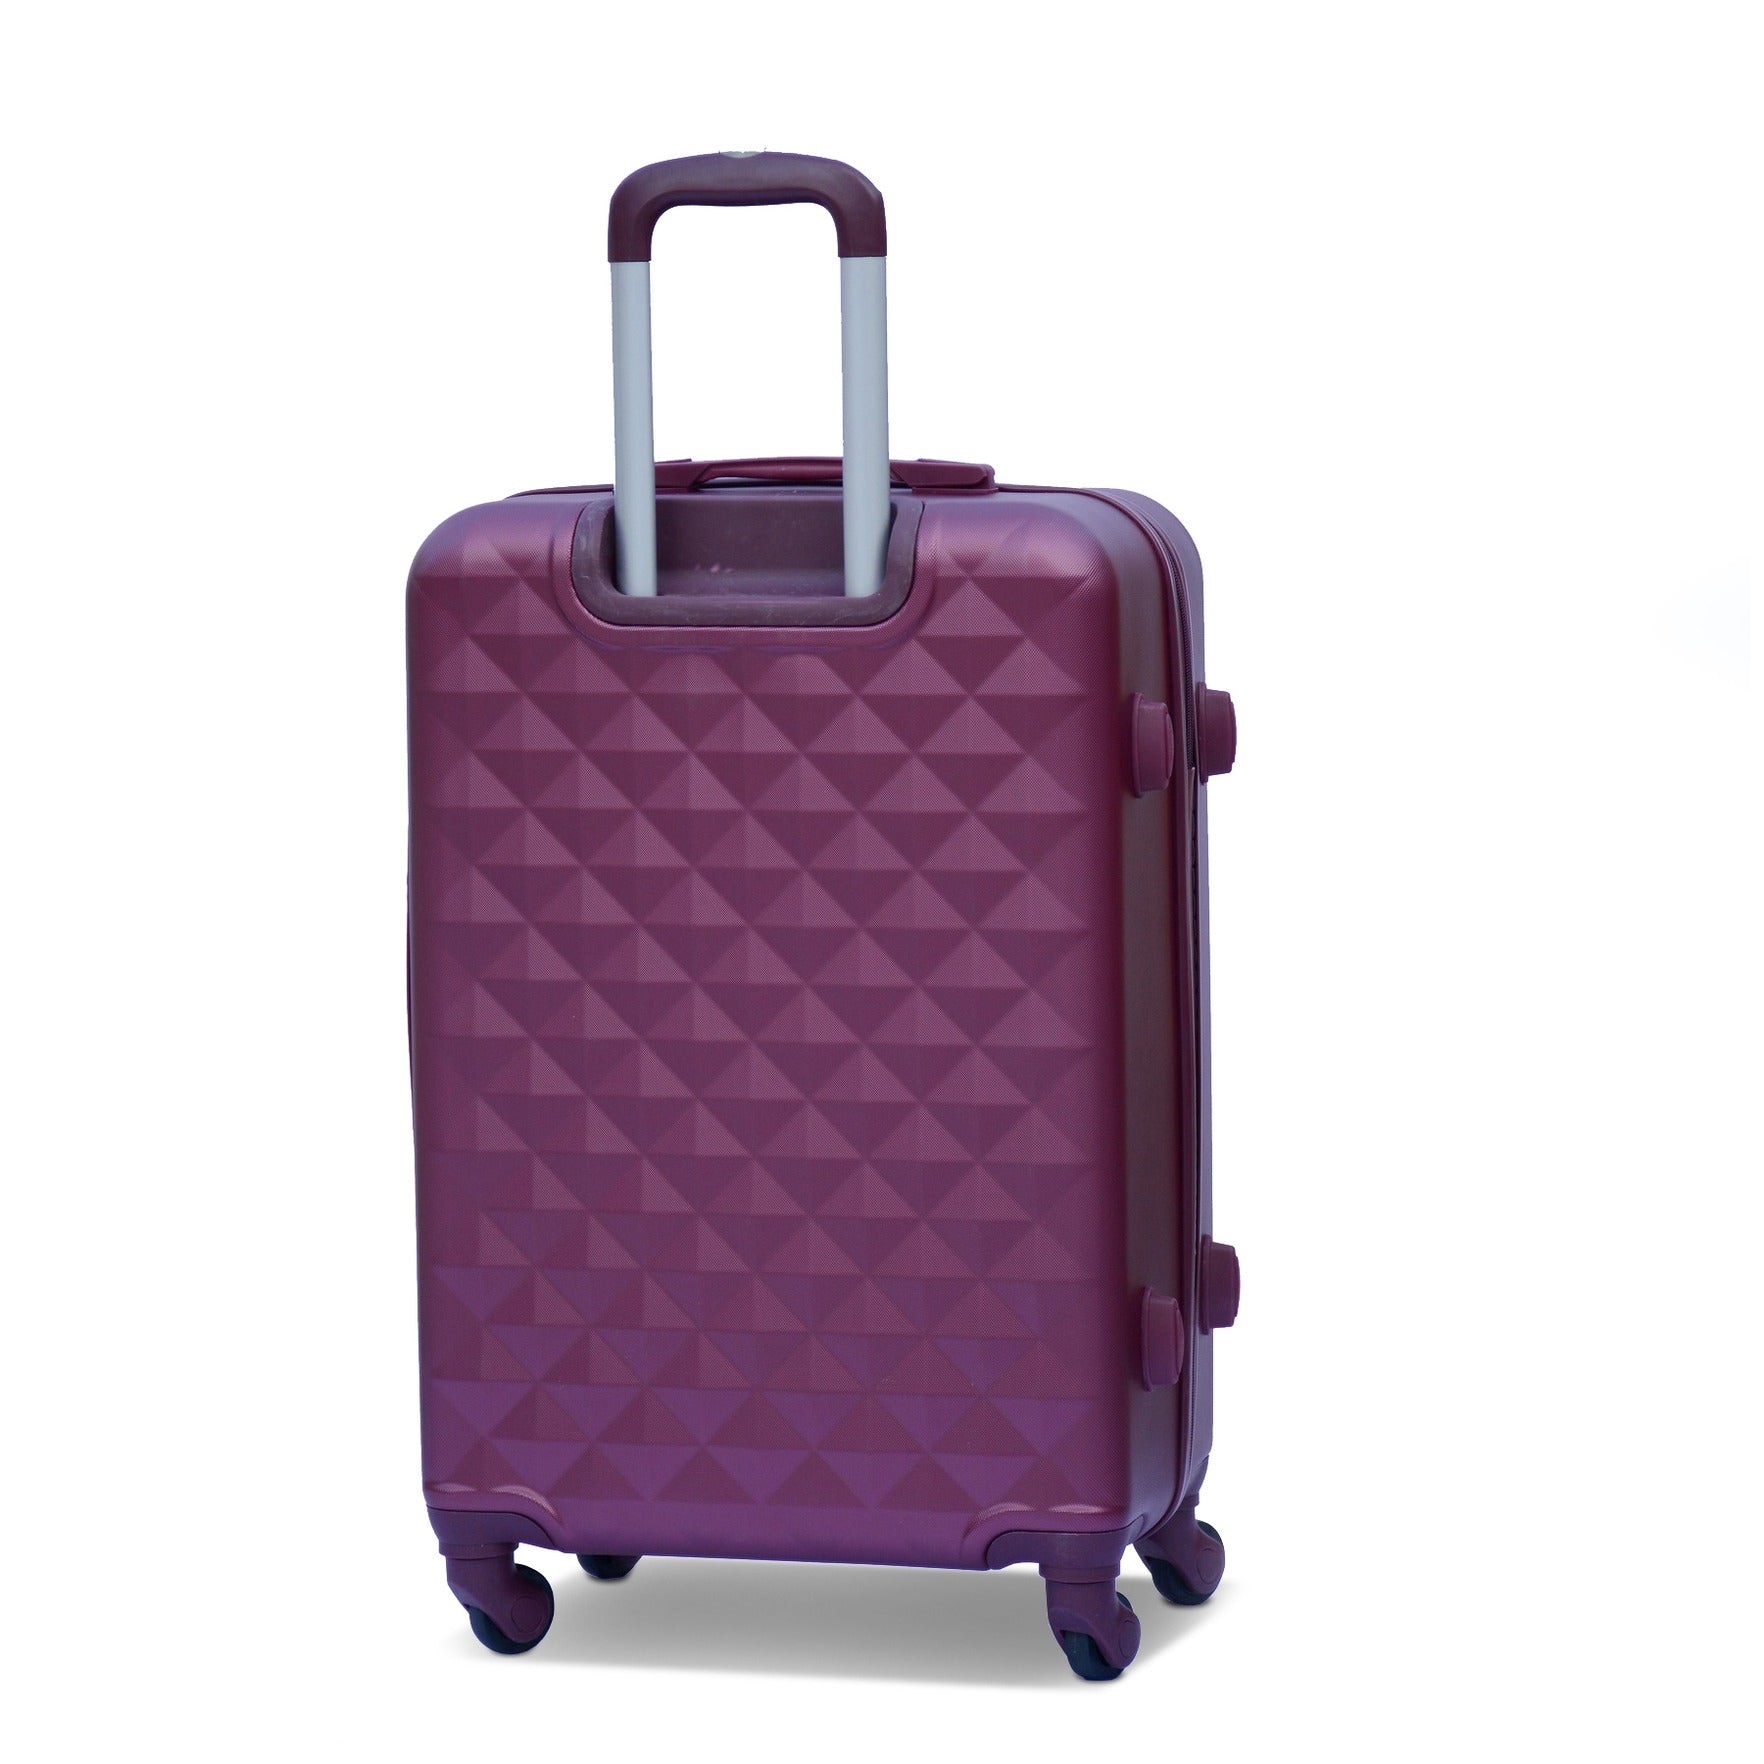 24" Maroon Colour Diamond Cut ABS Lightweight Luggage Bag With Spinner Wheel